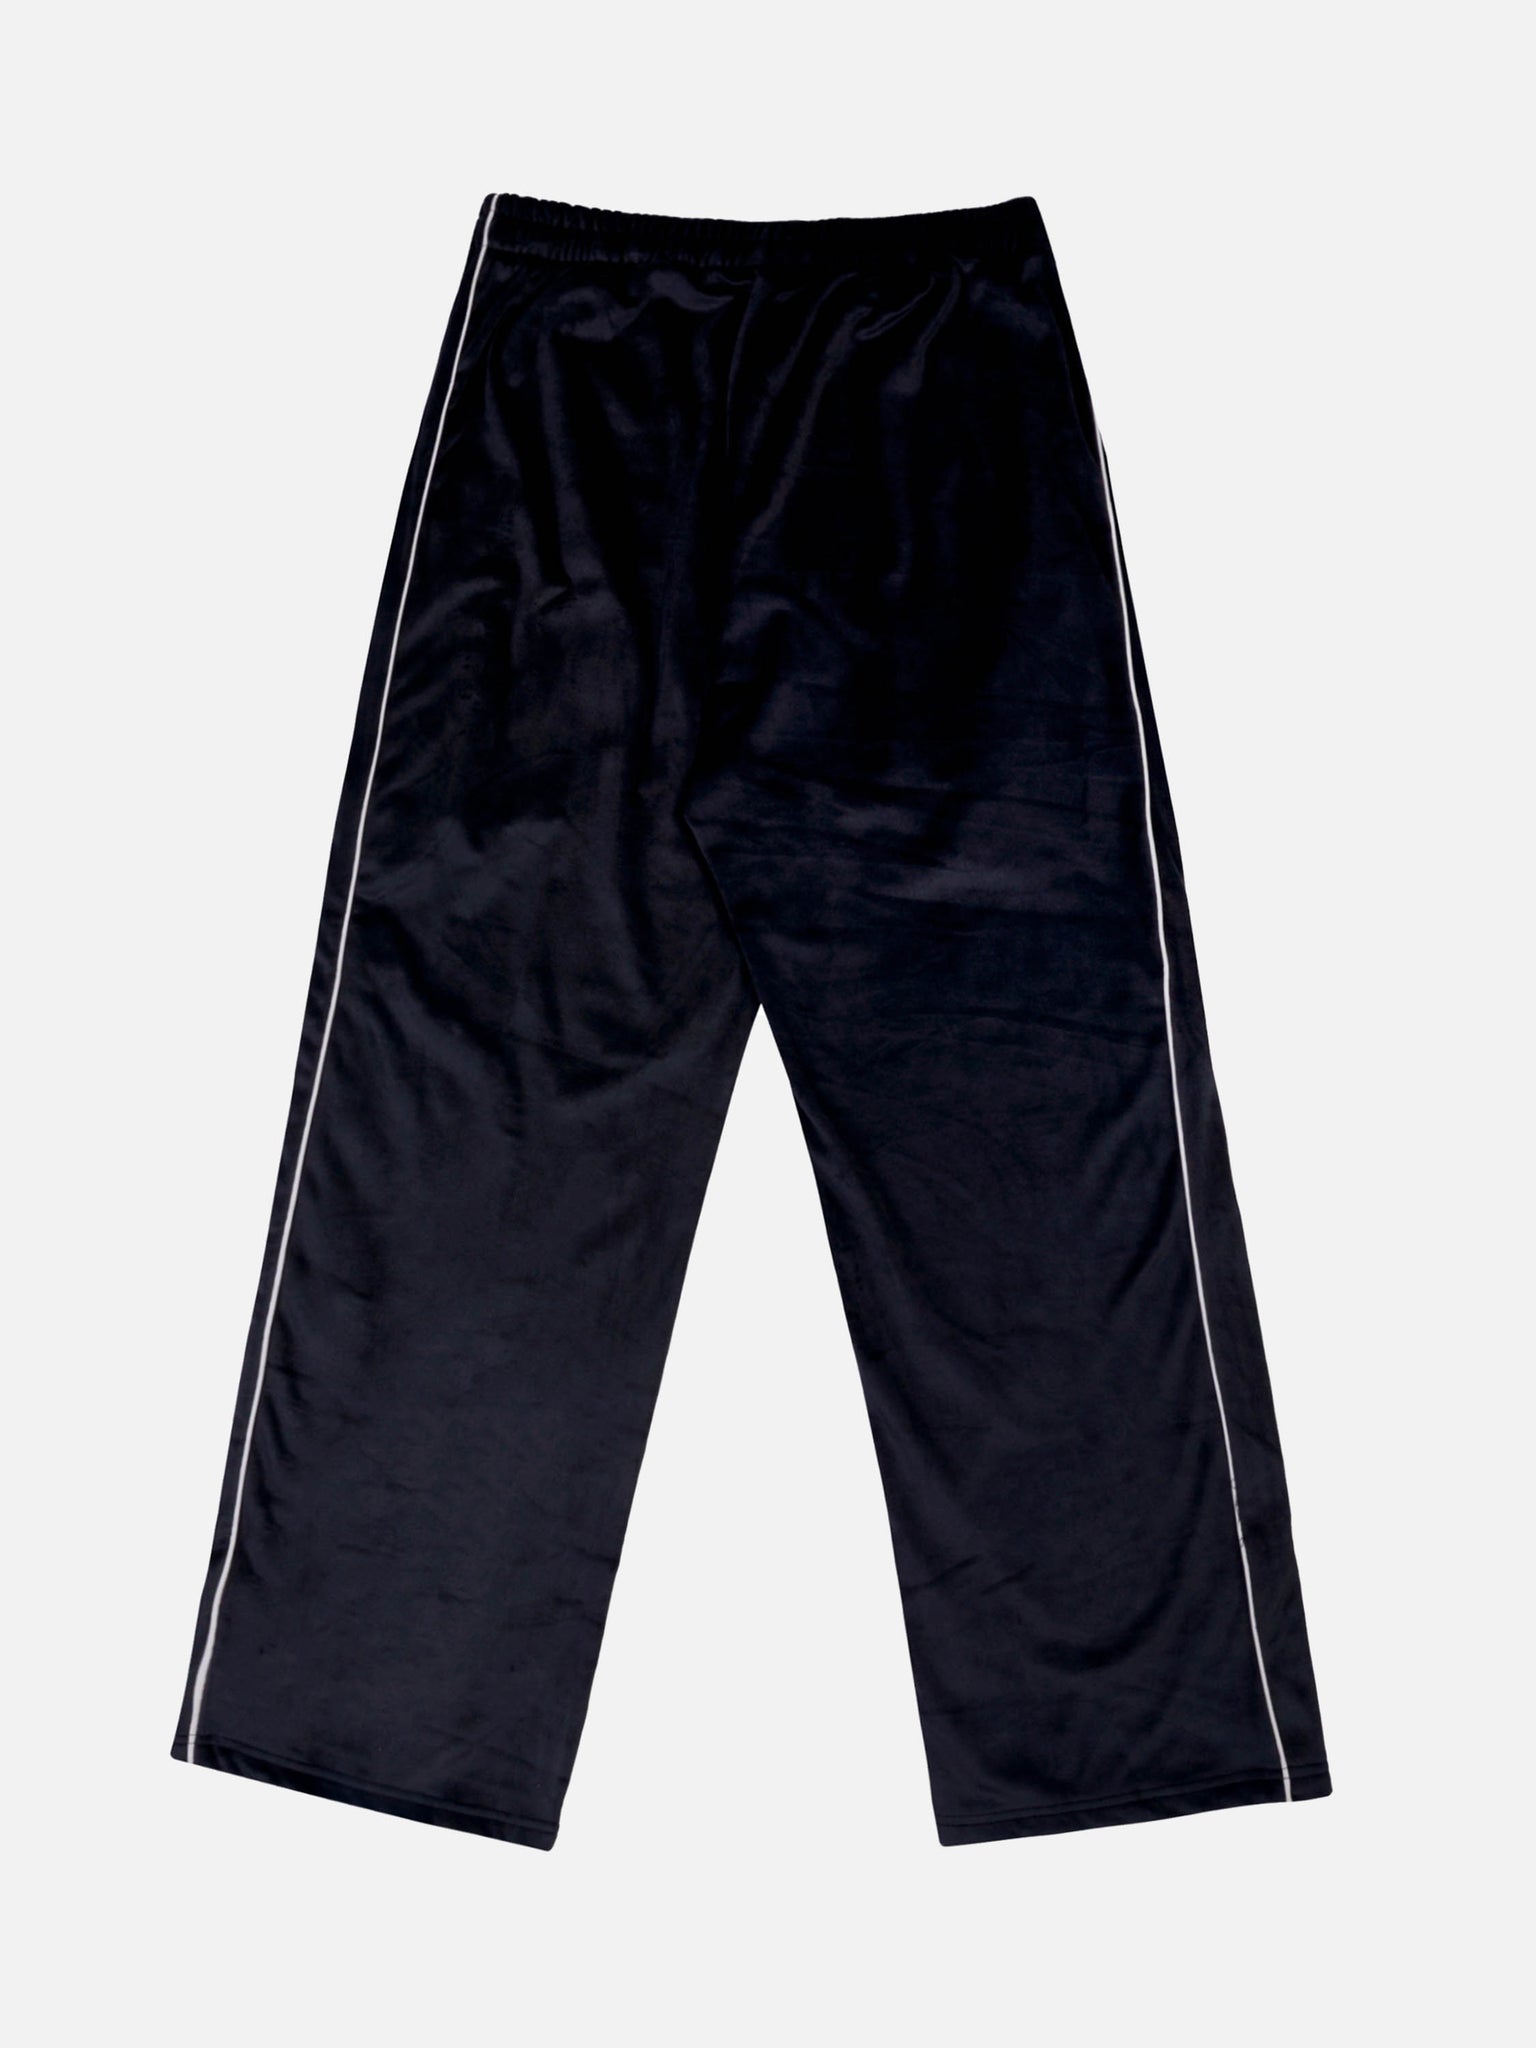 Thesupermade Comfortable And Versatile Casual Pants